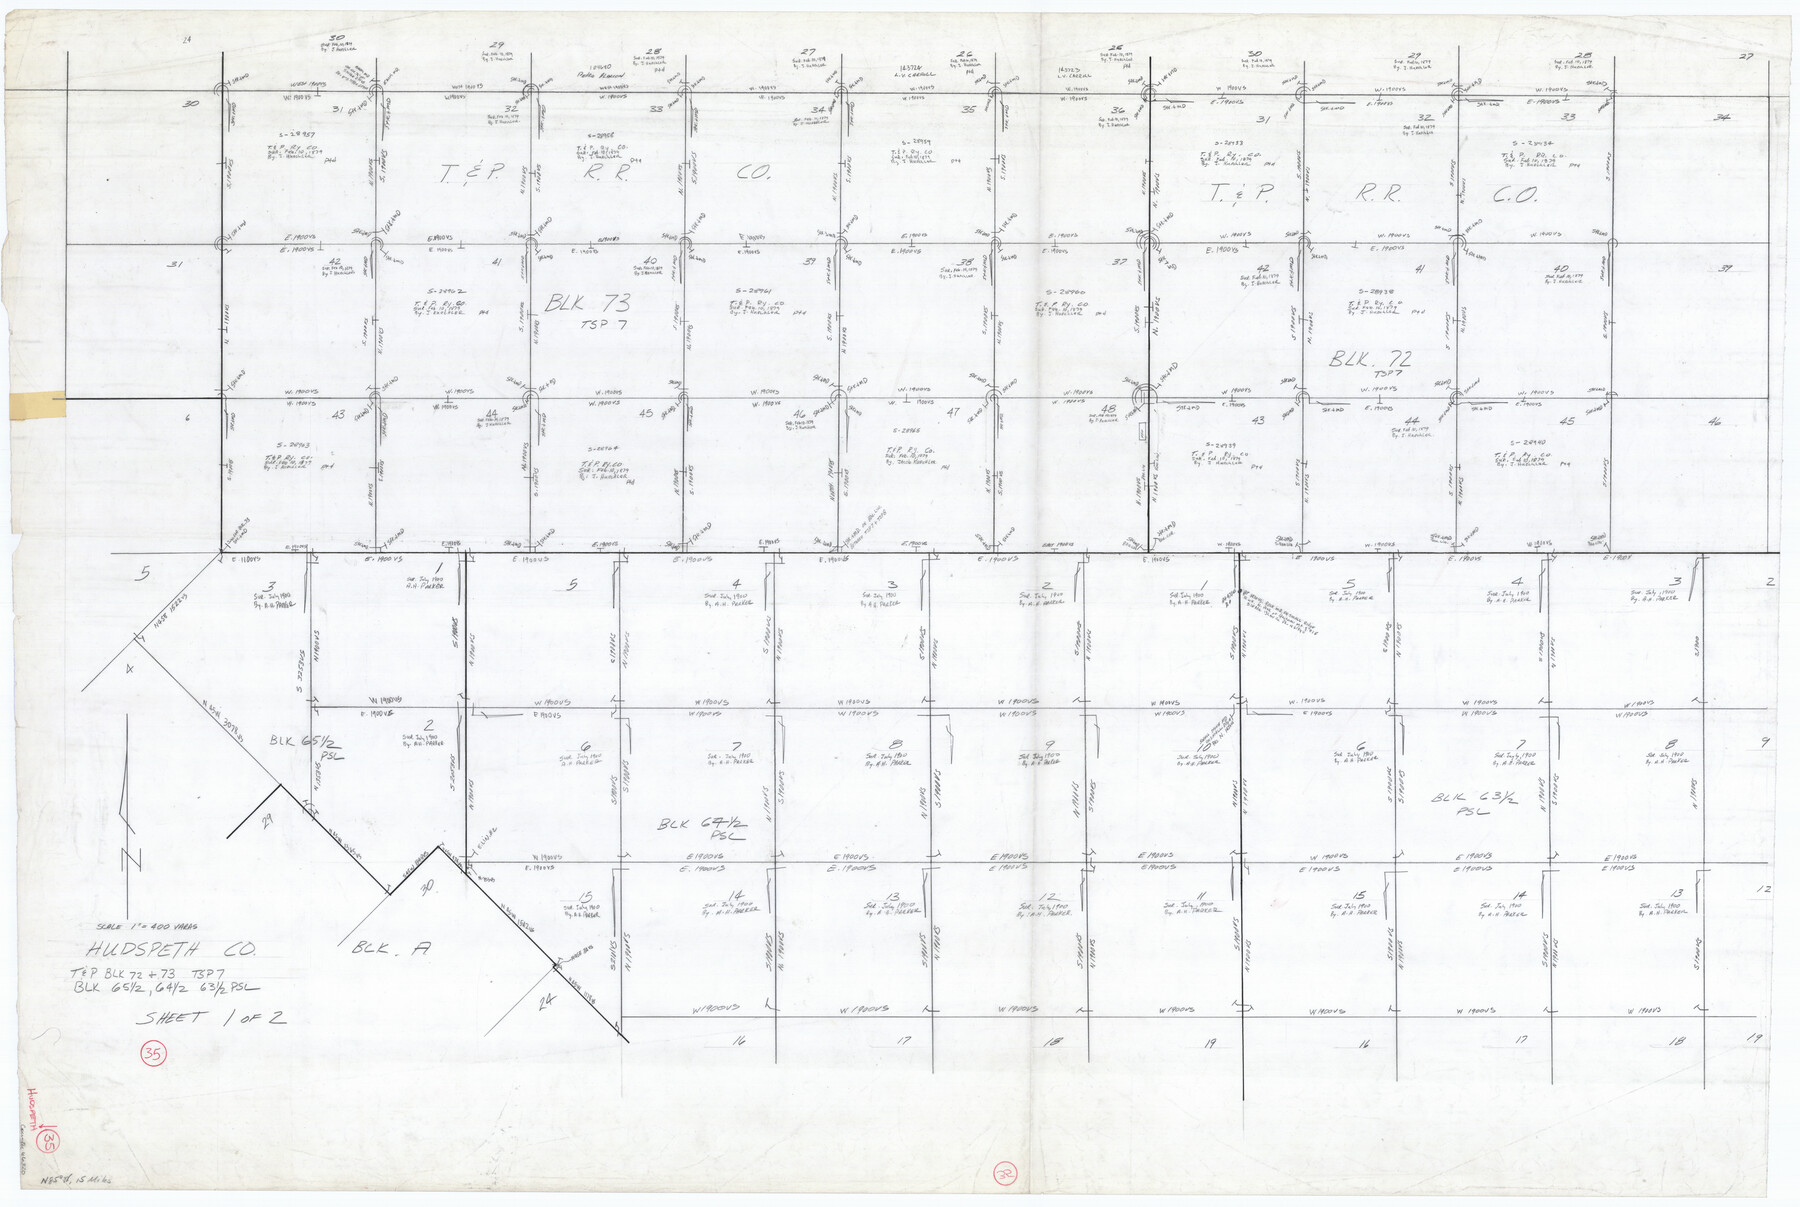 66320, Hudspeth County Working Sketch 35, General Map Collection